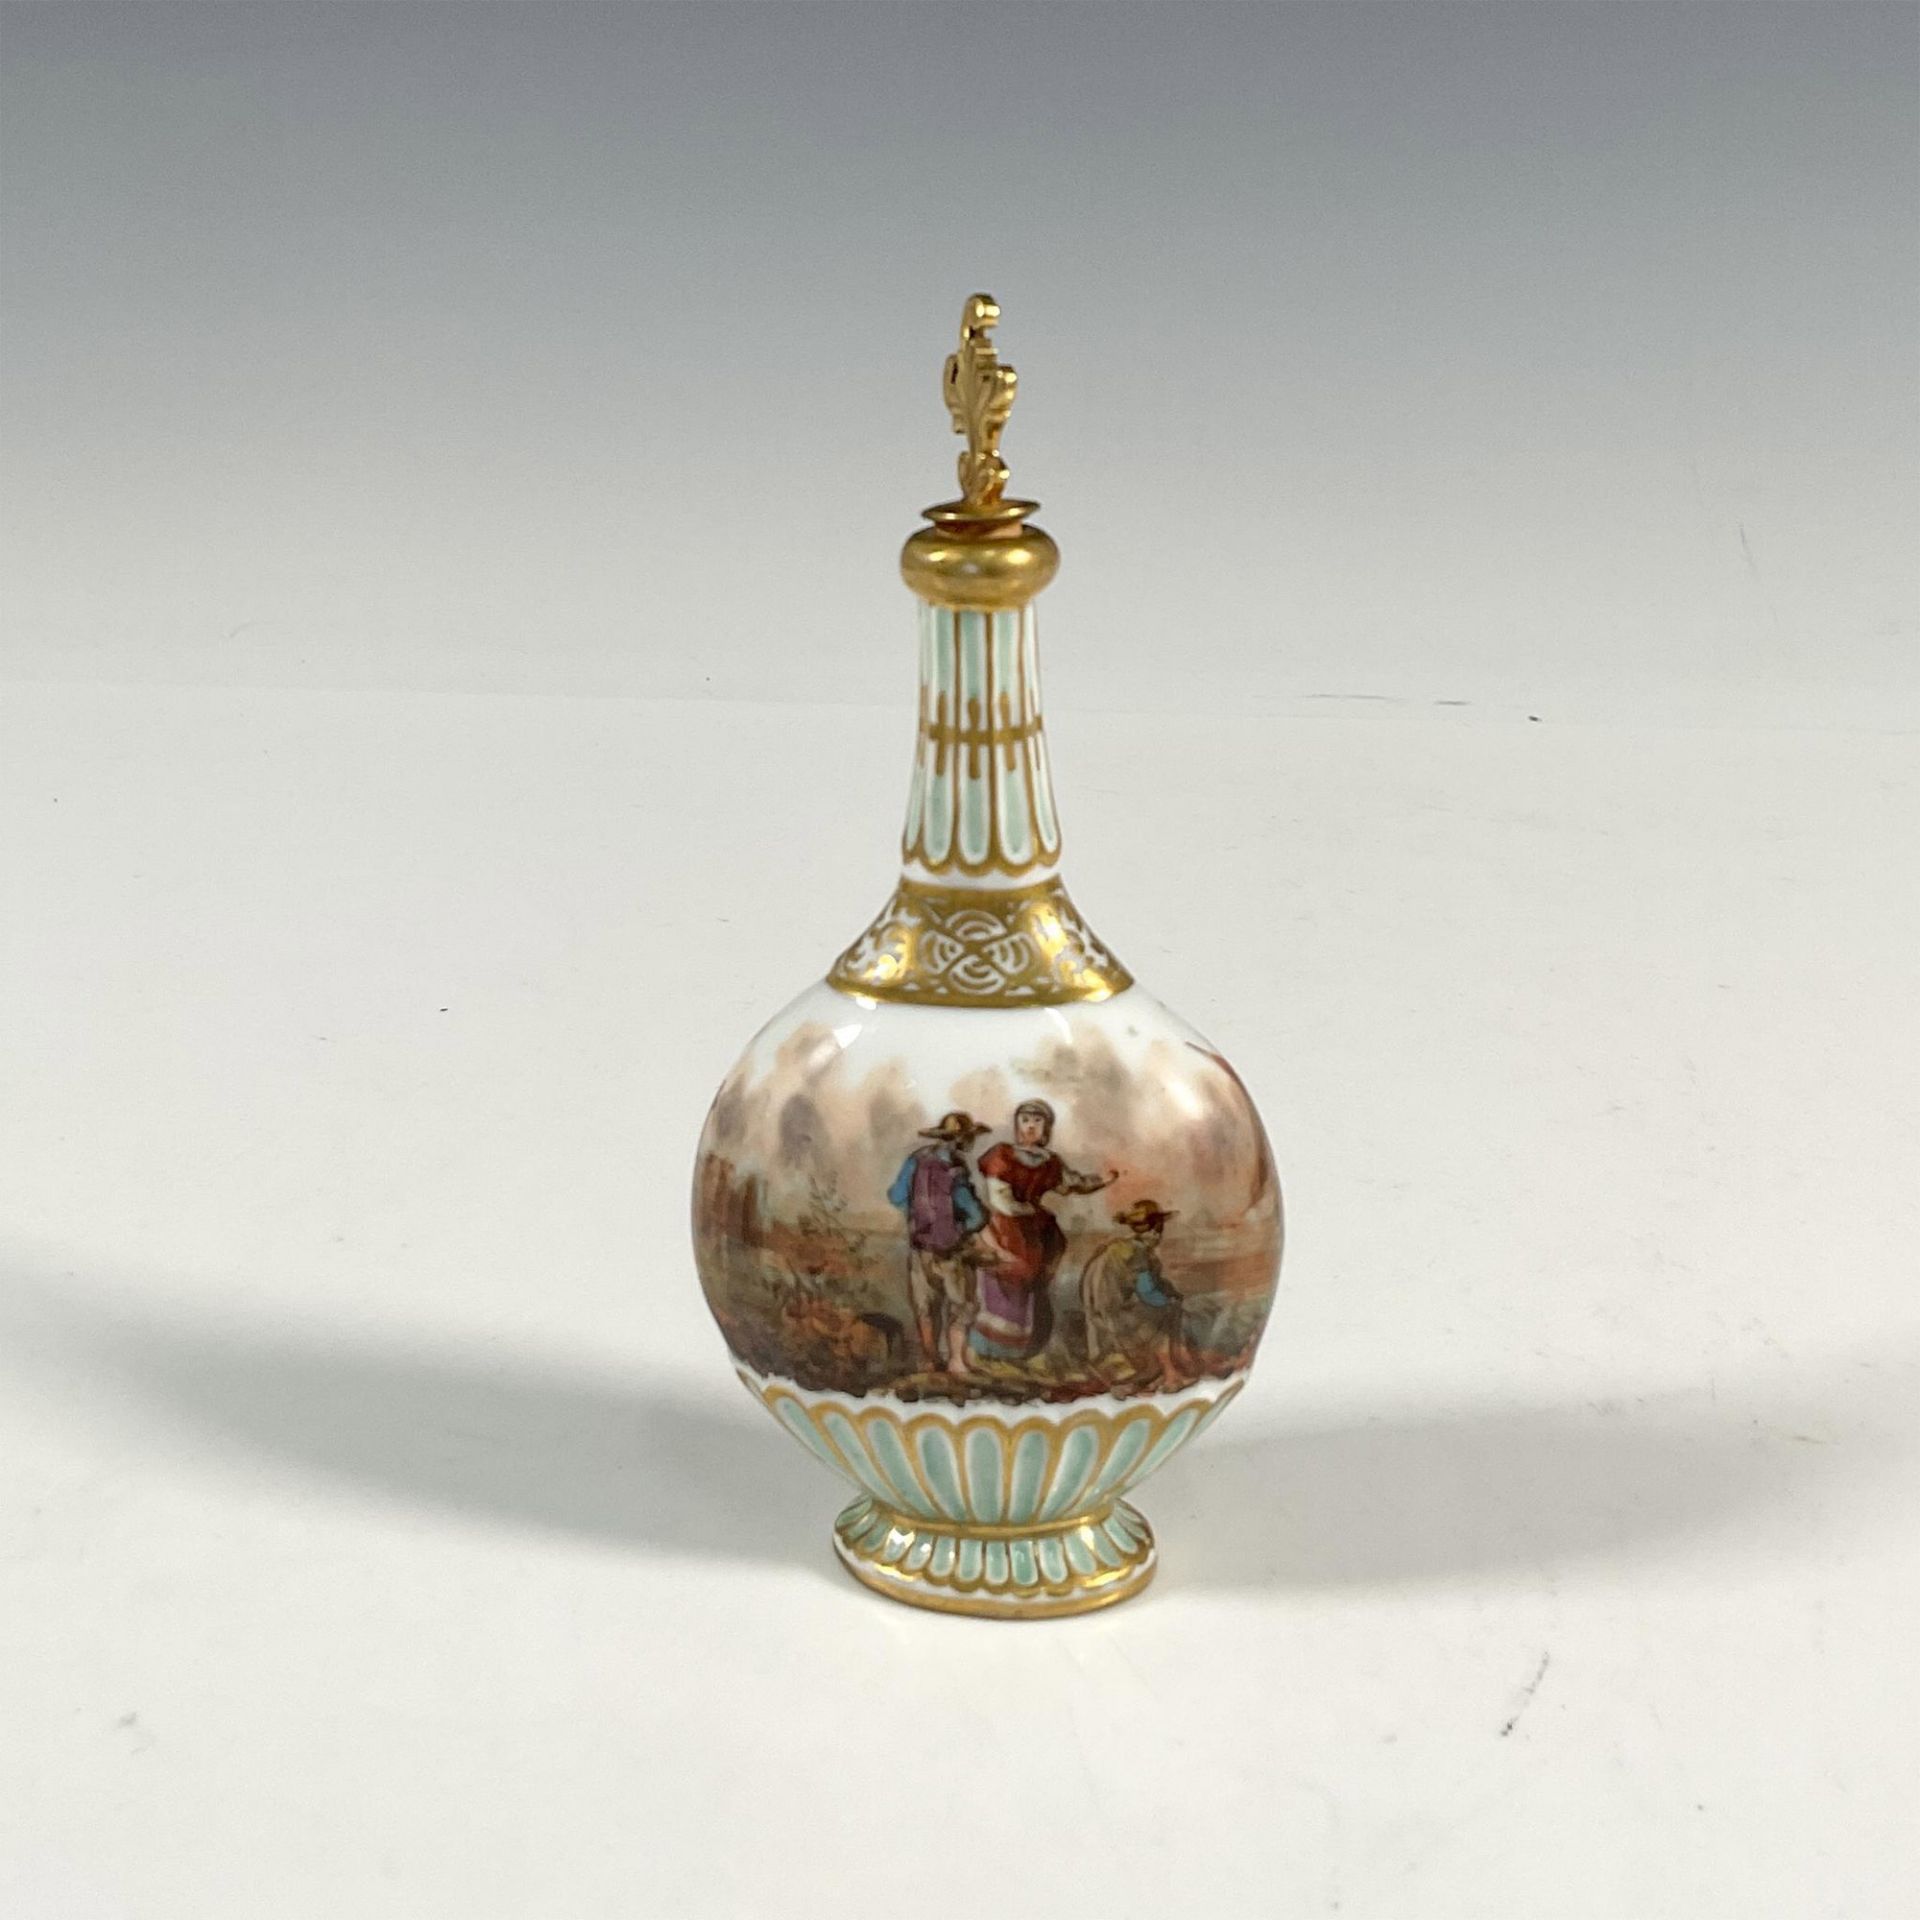 18th century Derby Porcelain Scent Bottle and Stopper - Image 4 of 5